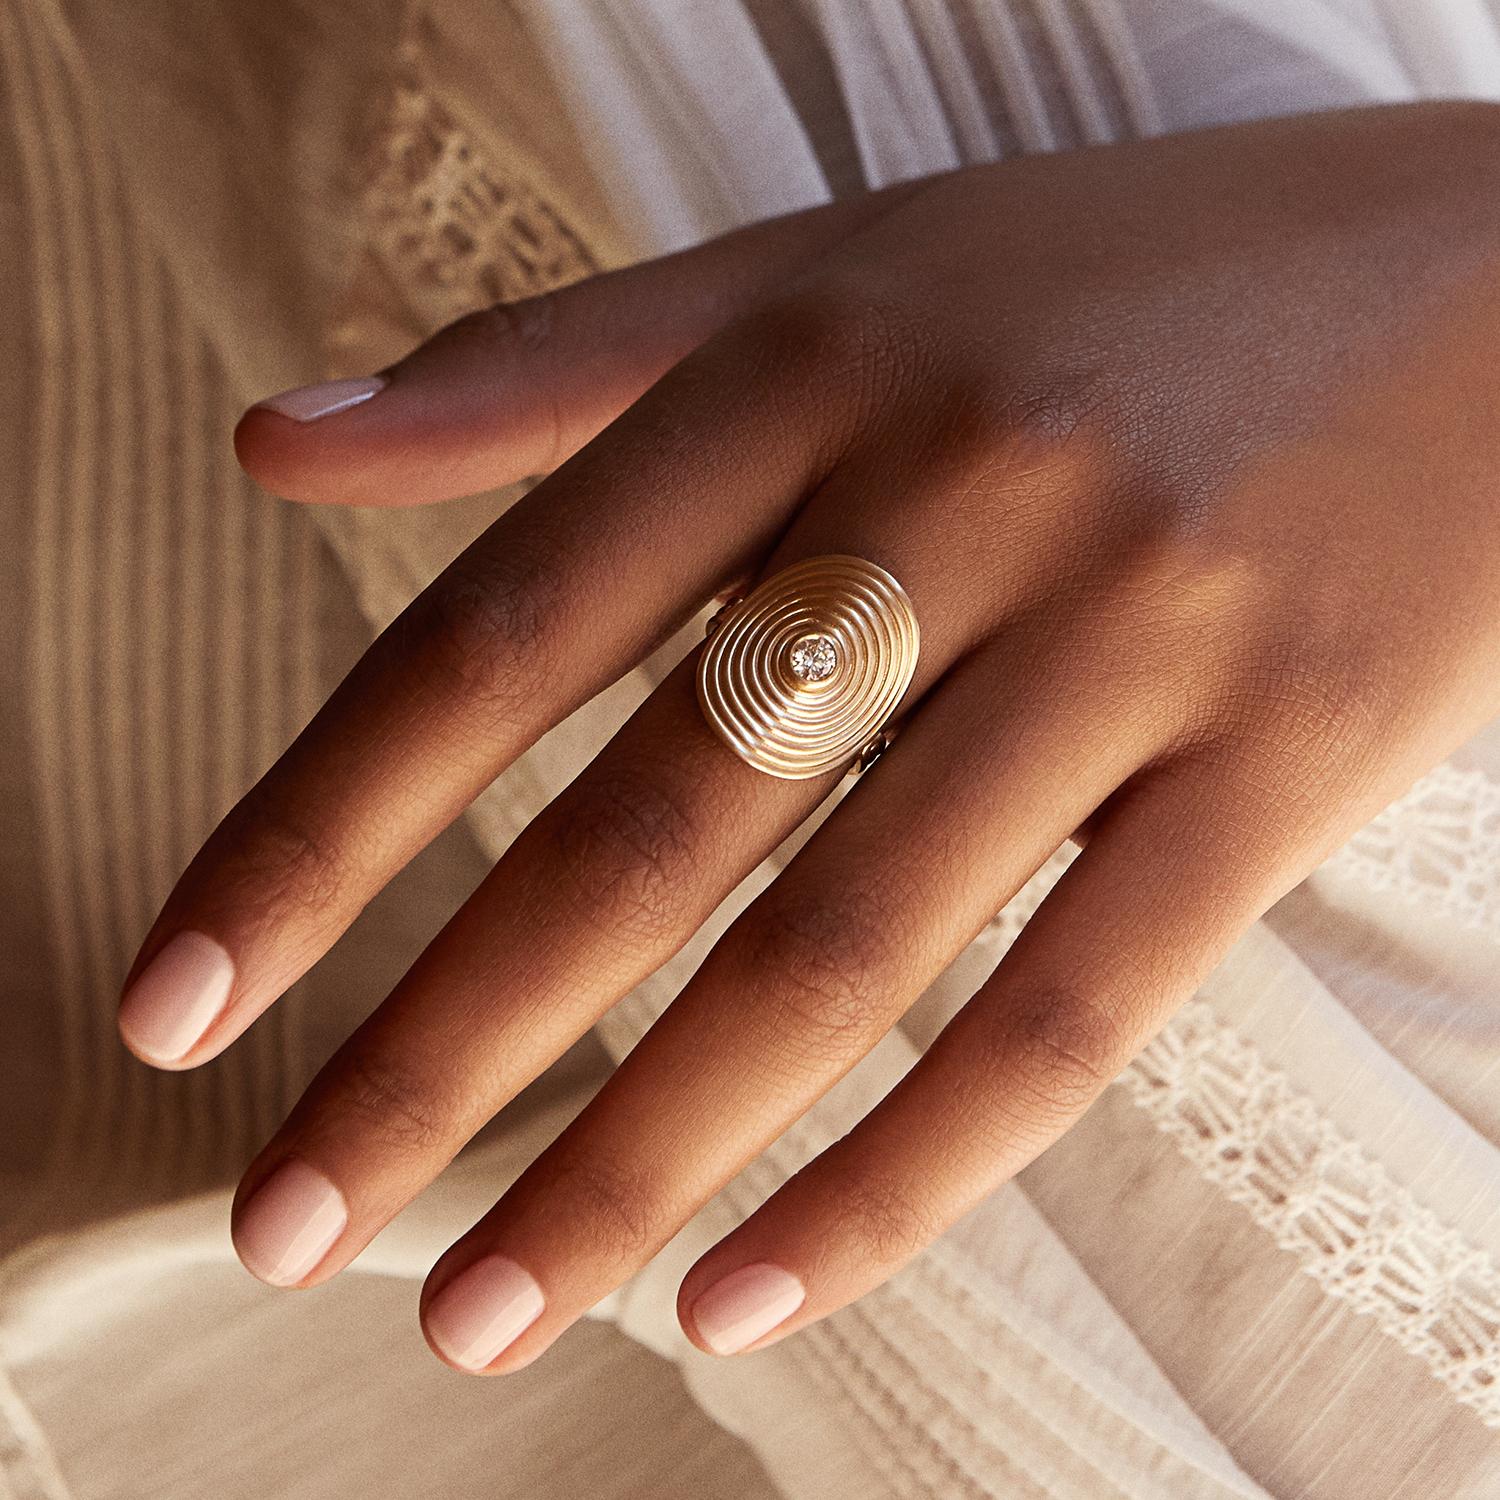 Selin Kent's Vera Ring features a perfectly proportioned oval spiral rendered in gold. The spiral is one of the oldest universal symbols representing themes of change, growth, and evolution. 

22mm / 0.90'' top-to-bottom ~ 0.25 carat diamond